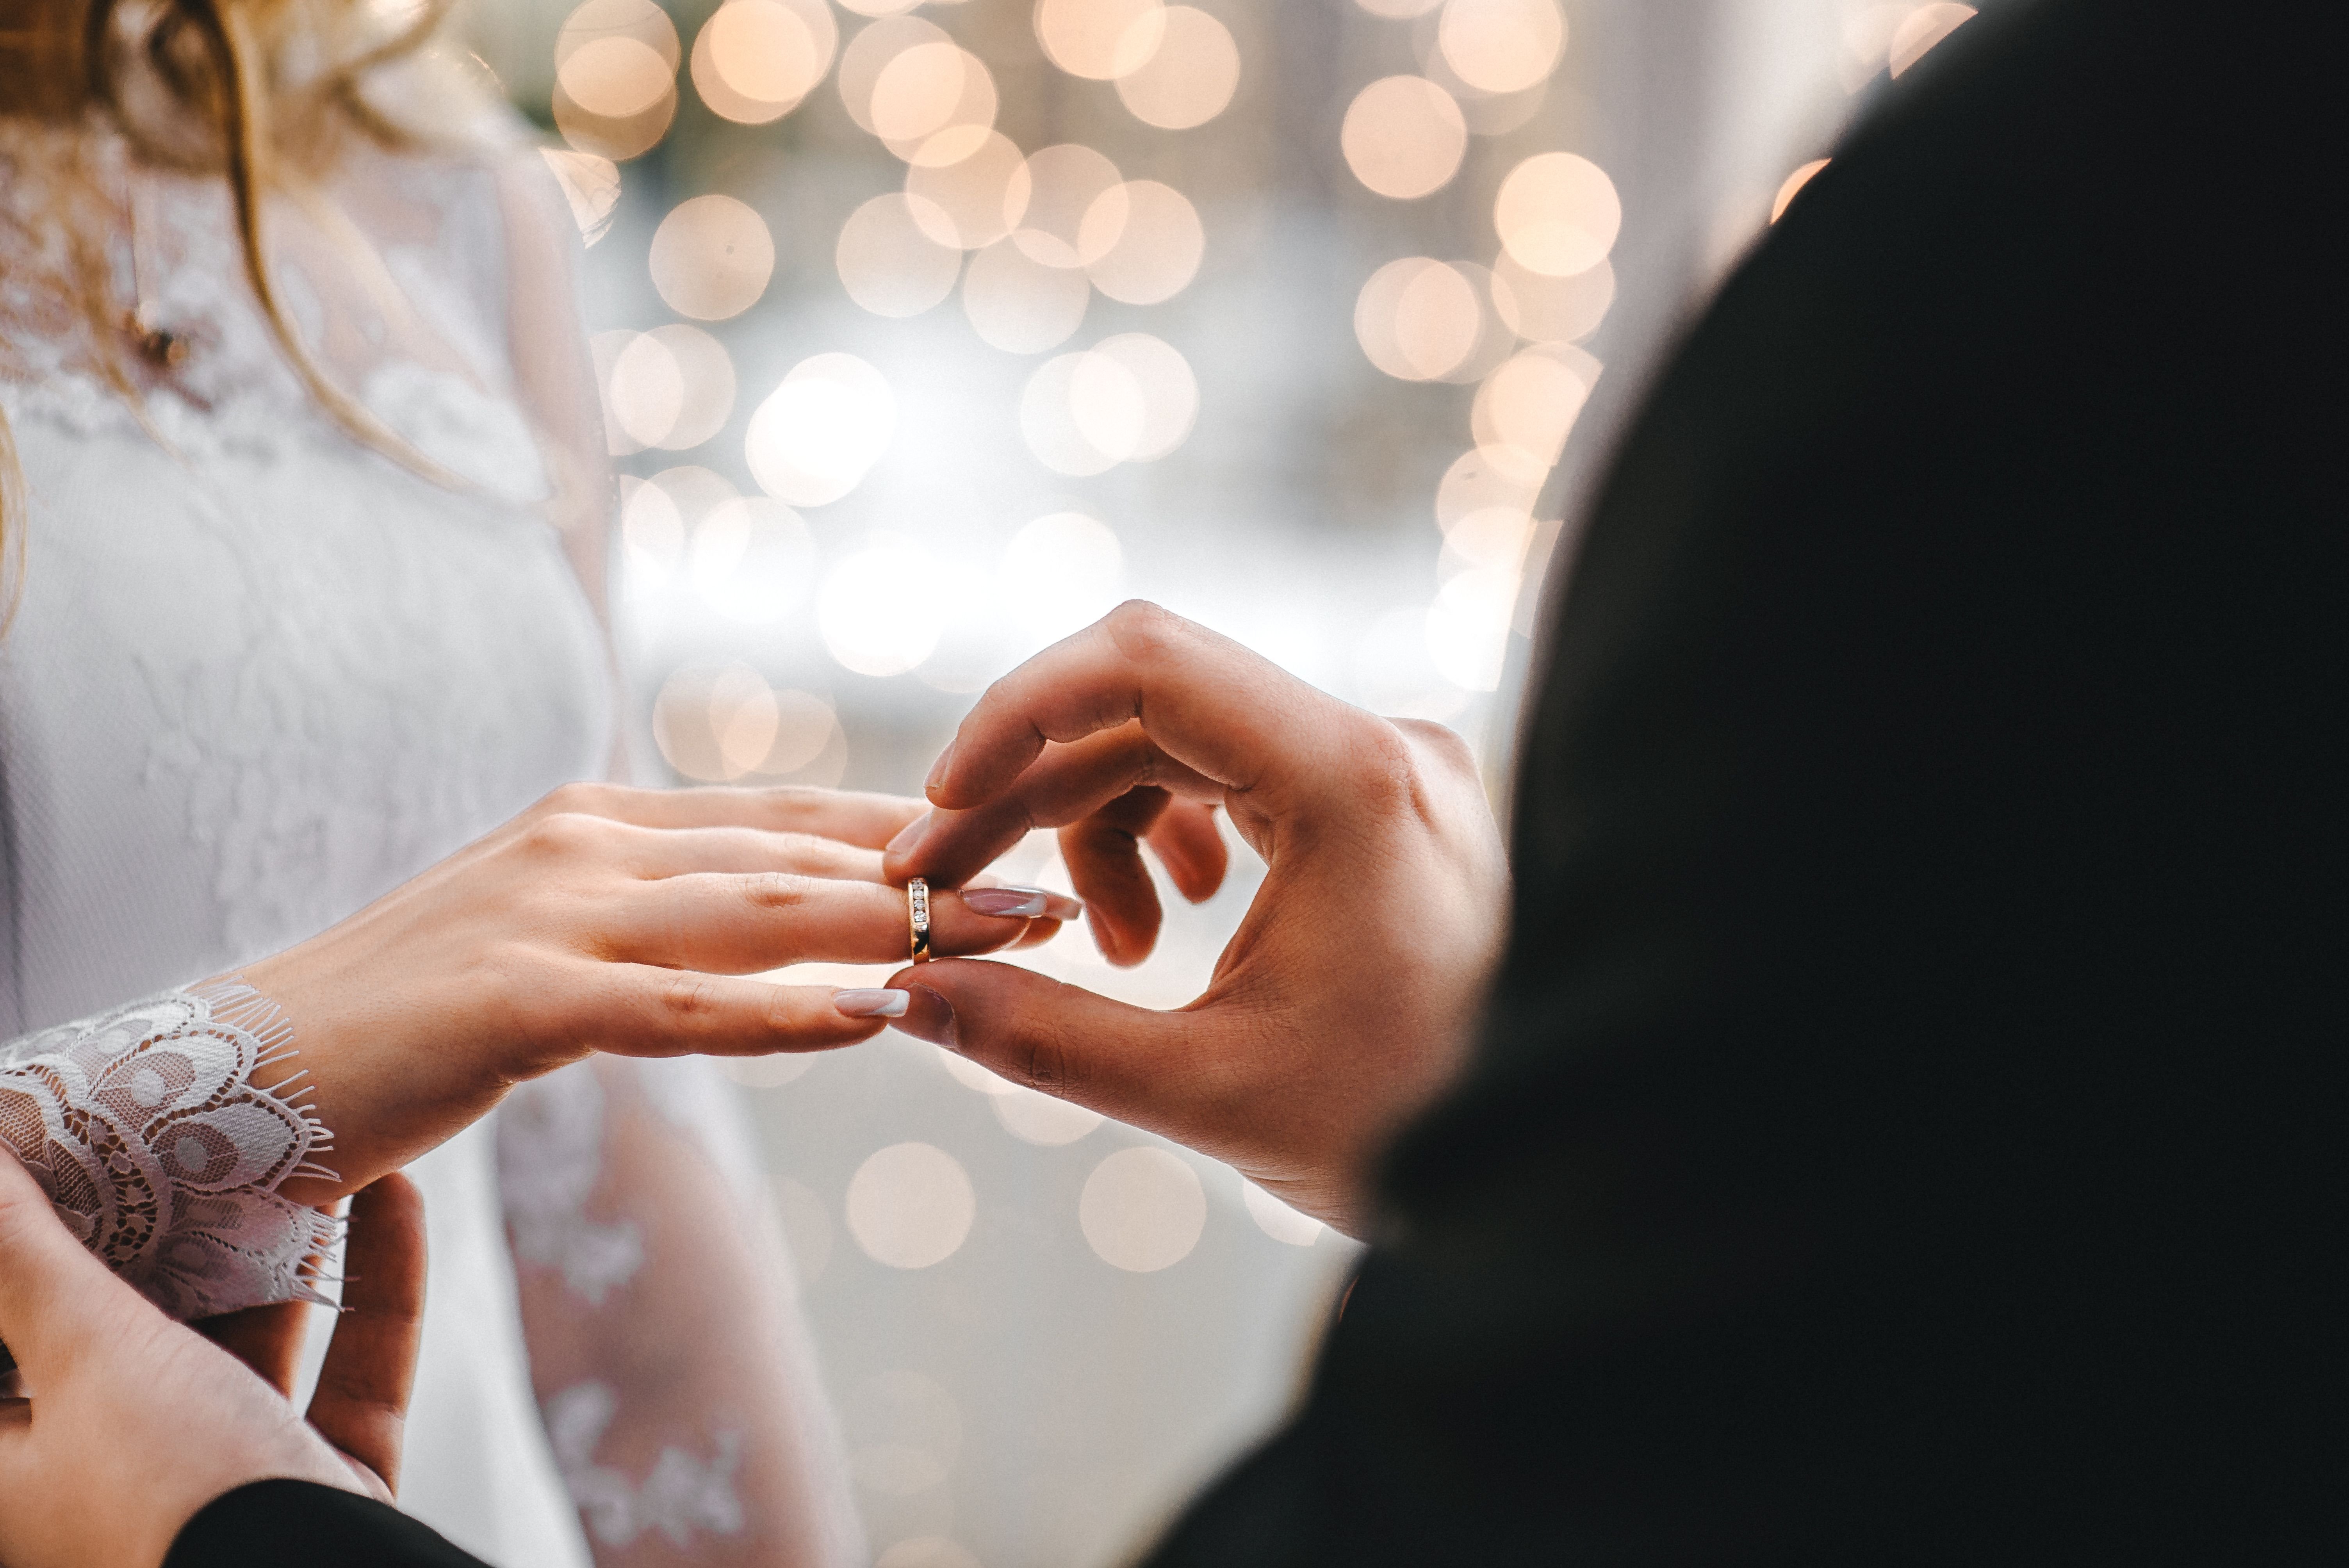 A groom placing the wedding ring on his bride's finger. | Source: Shutterstock